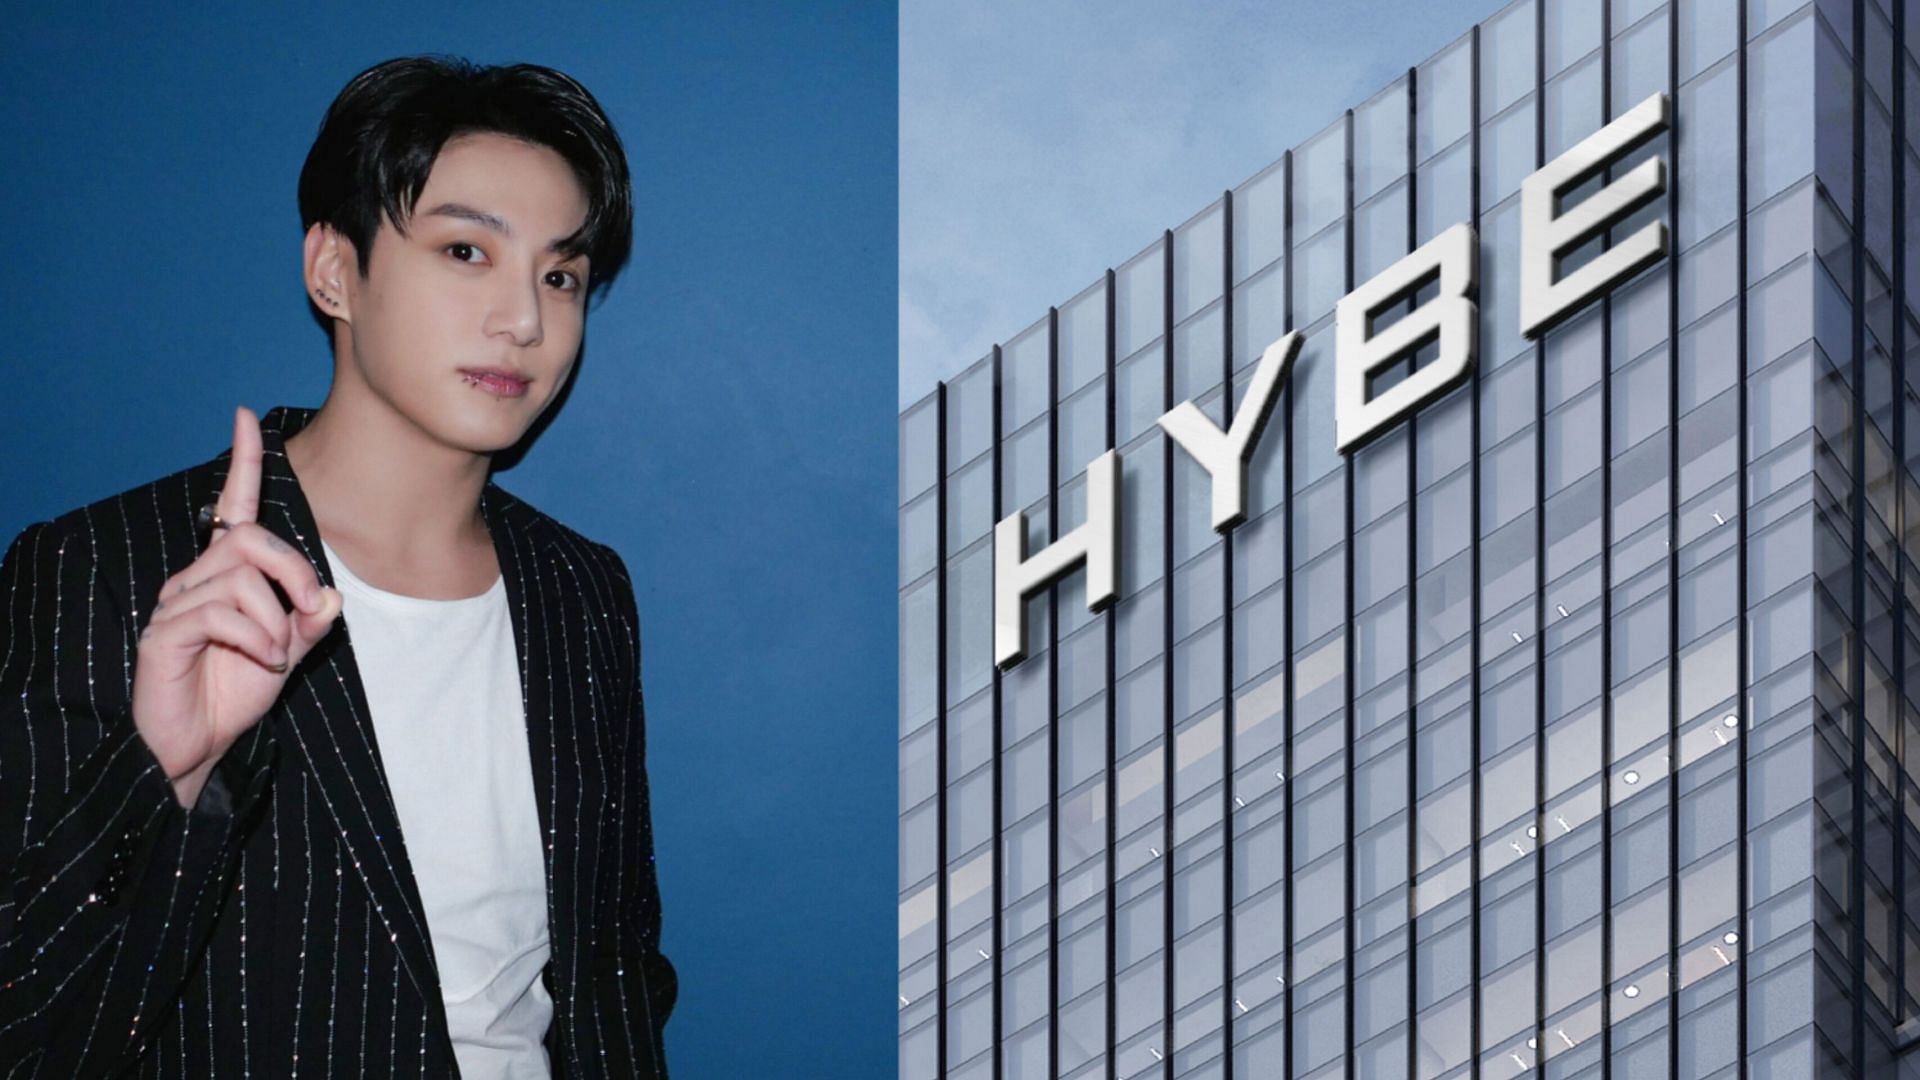 JUNGKOOK recognized as a key contributor in HYBE